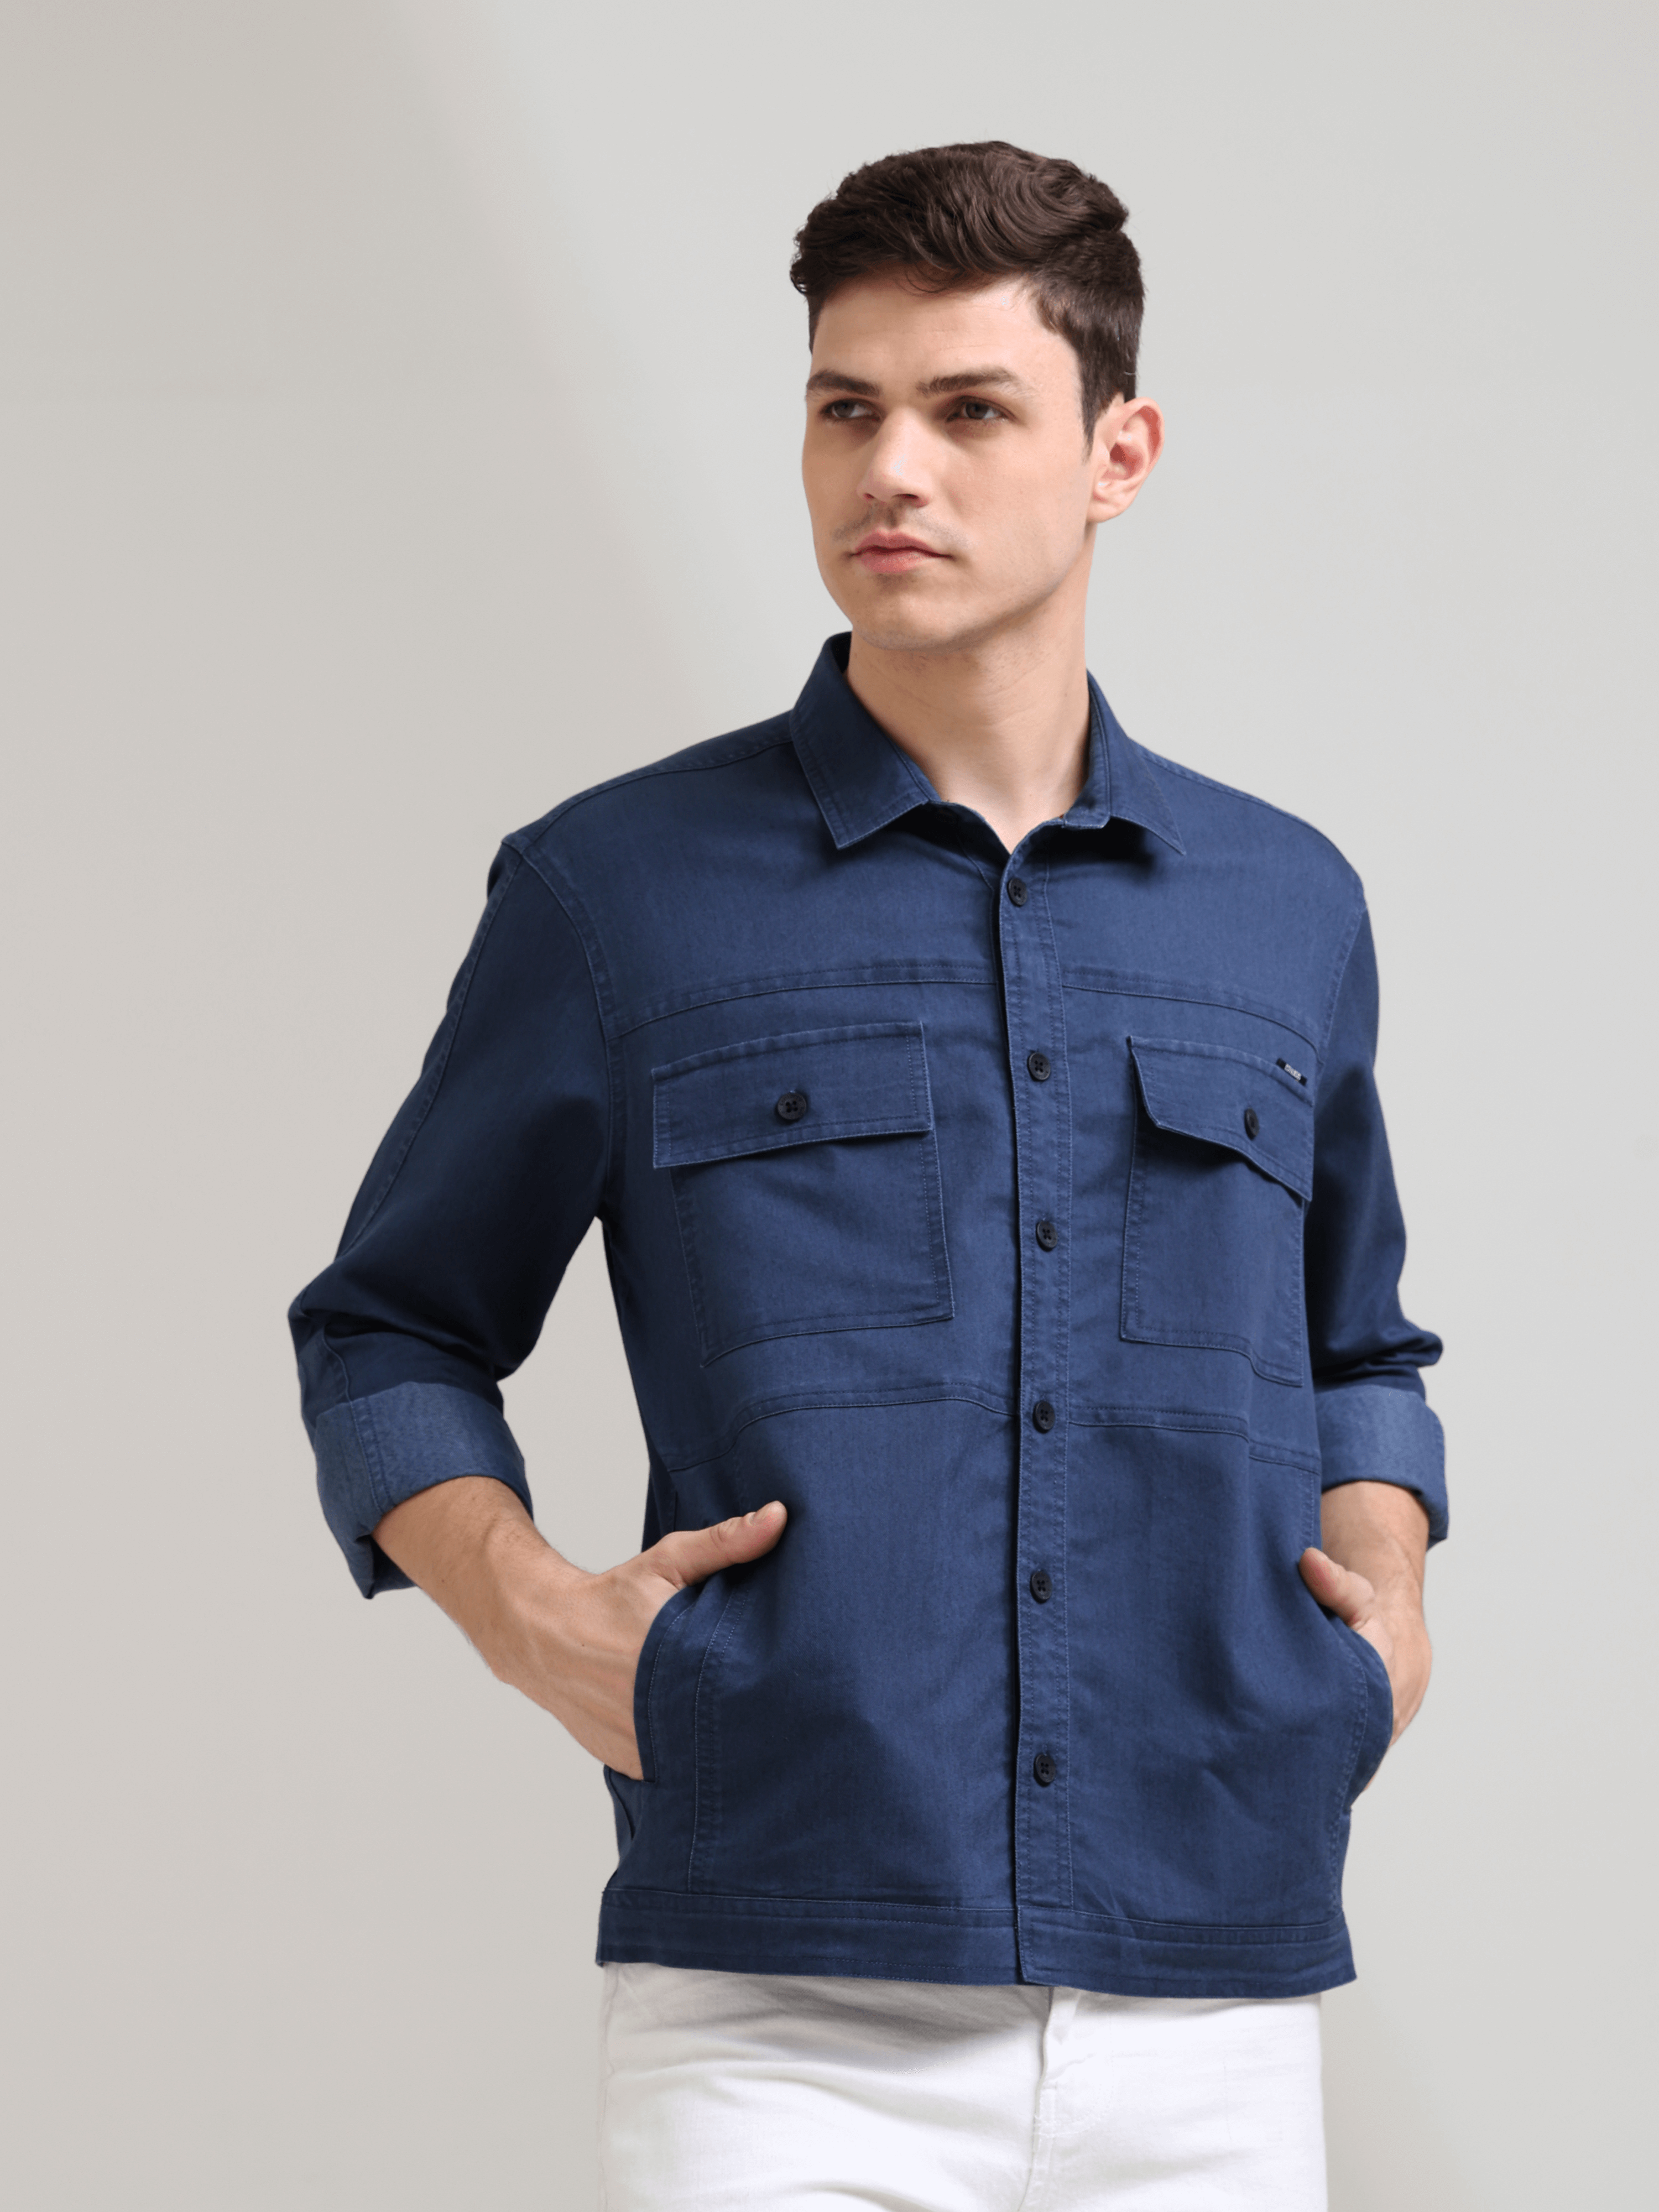 Prussian Blue Denim Shirt shop online at Estilocus. 100% premium Denim Full-sleeve shirt Cut and sew placket. Regular collar Double button edge cuff Double pocket, other end with flap pocket Curved bottom hemline HD elegant print at panal All Double needl